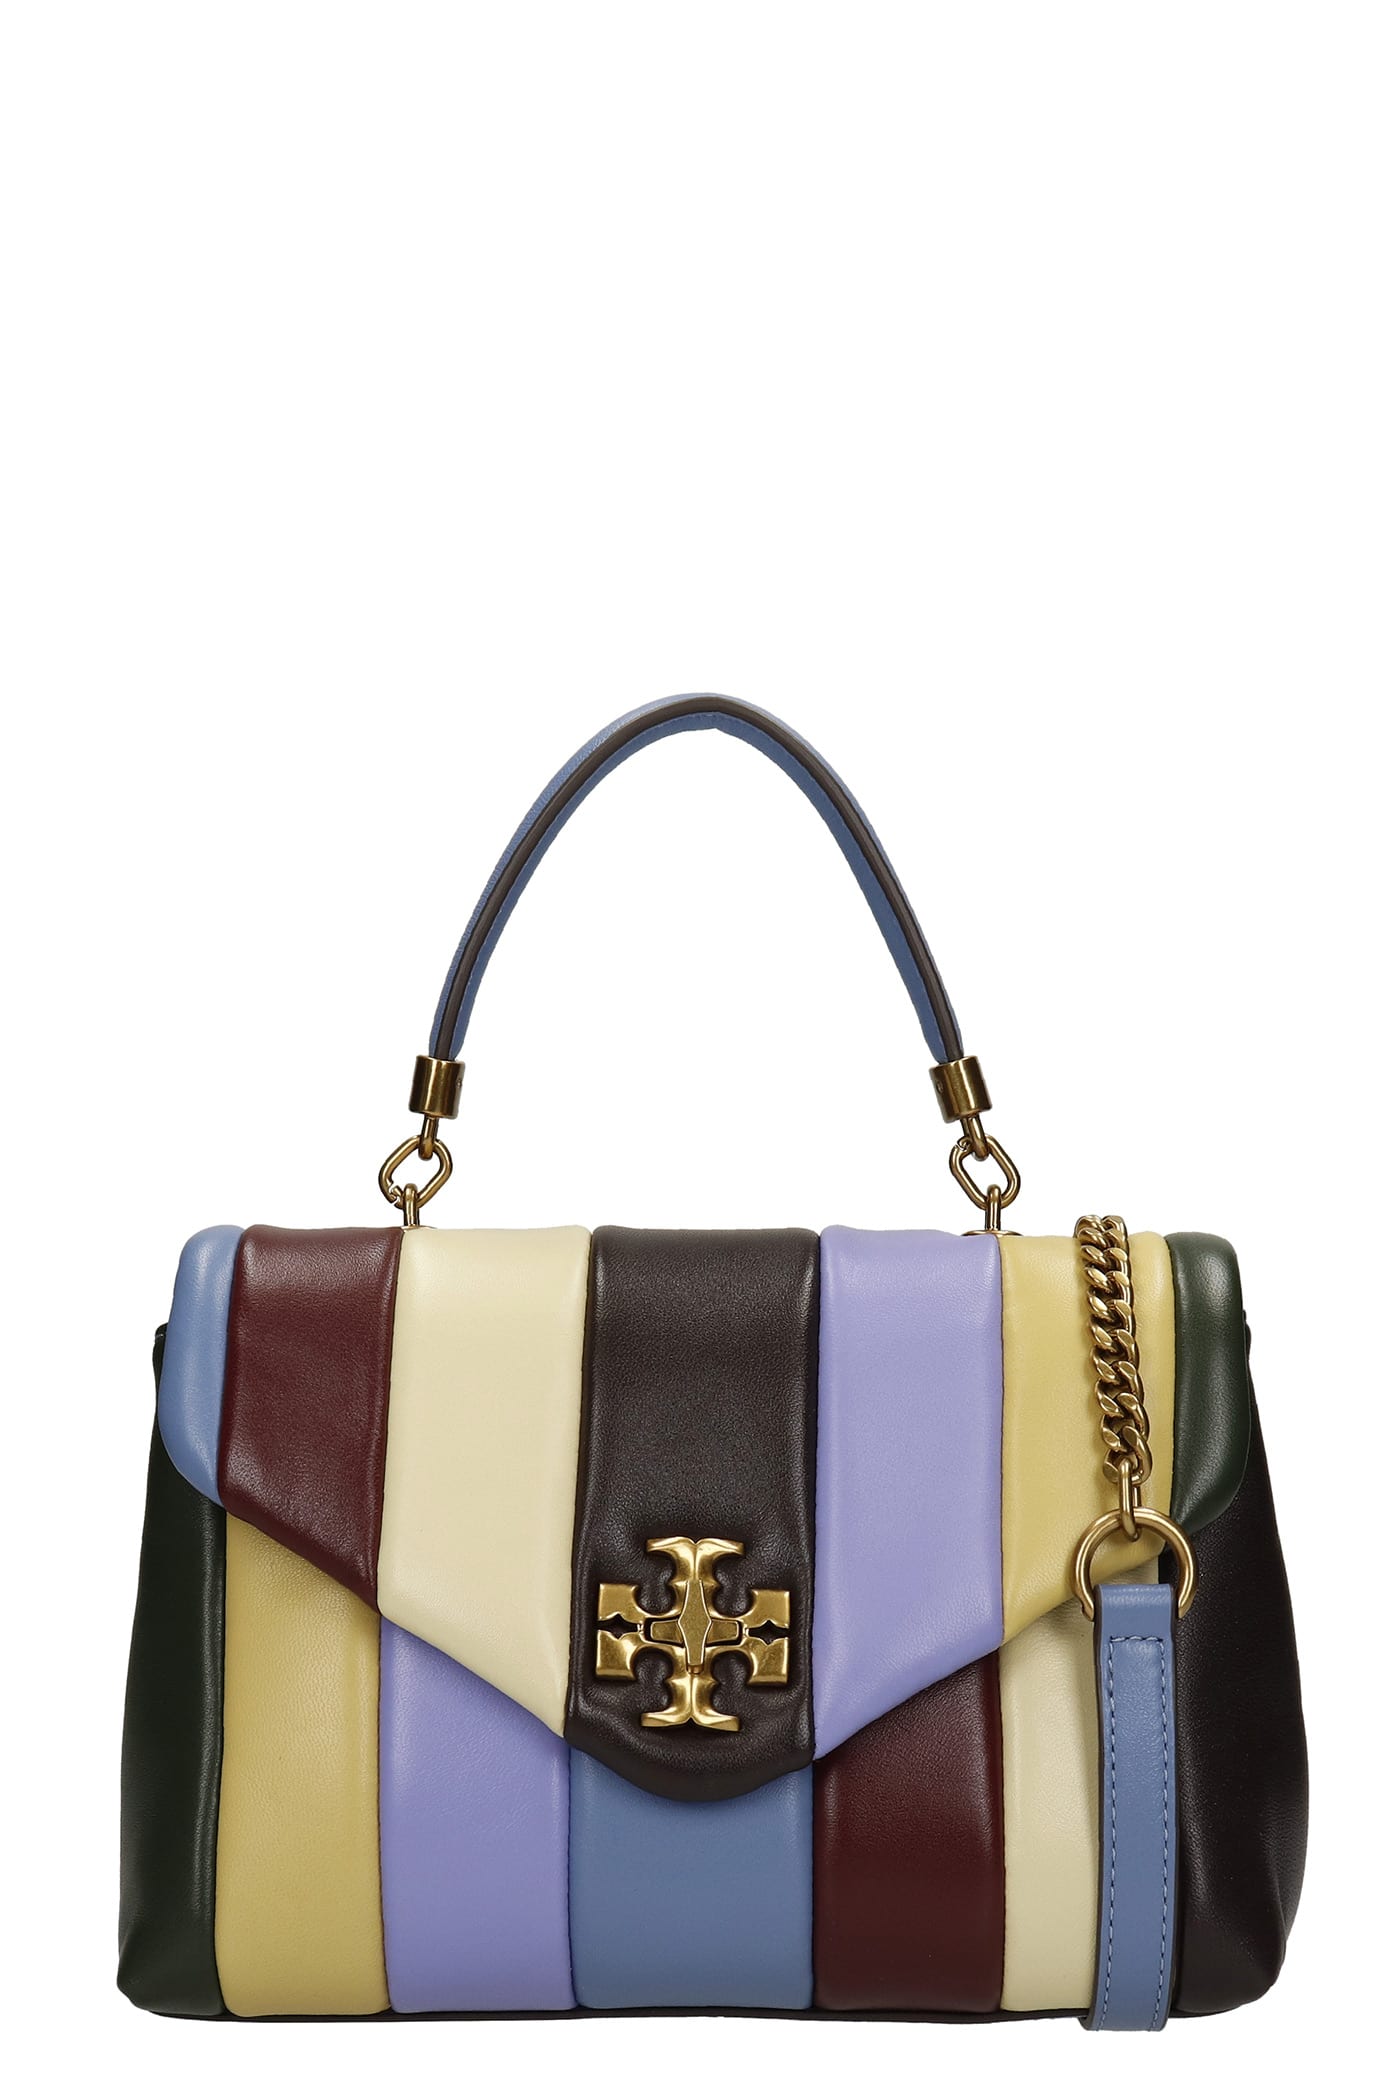 Tory Burch Hand Bag In Multicolor Leather